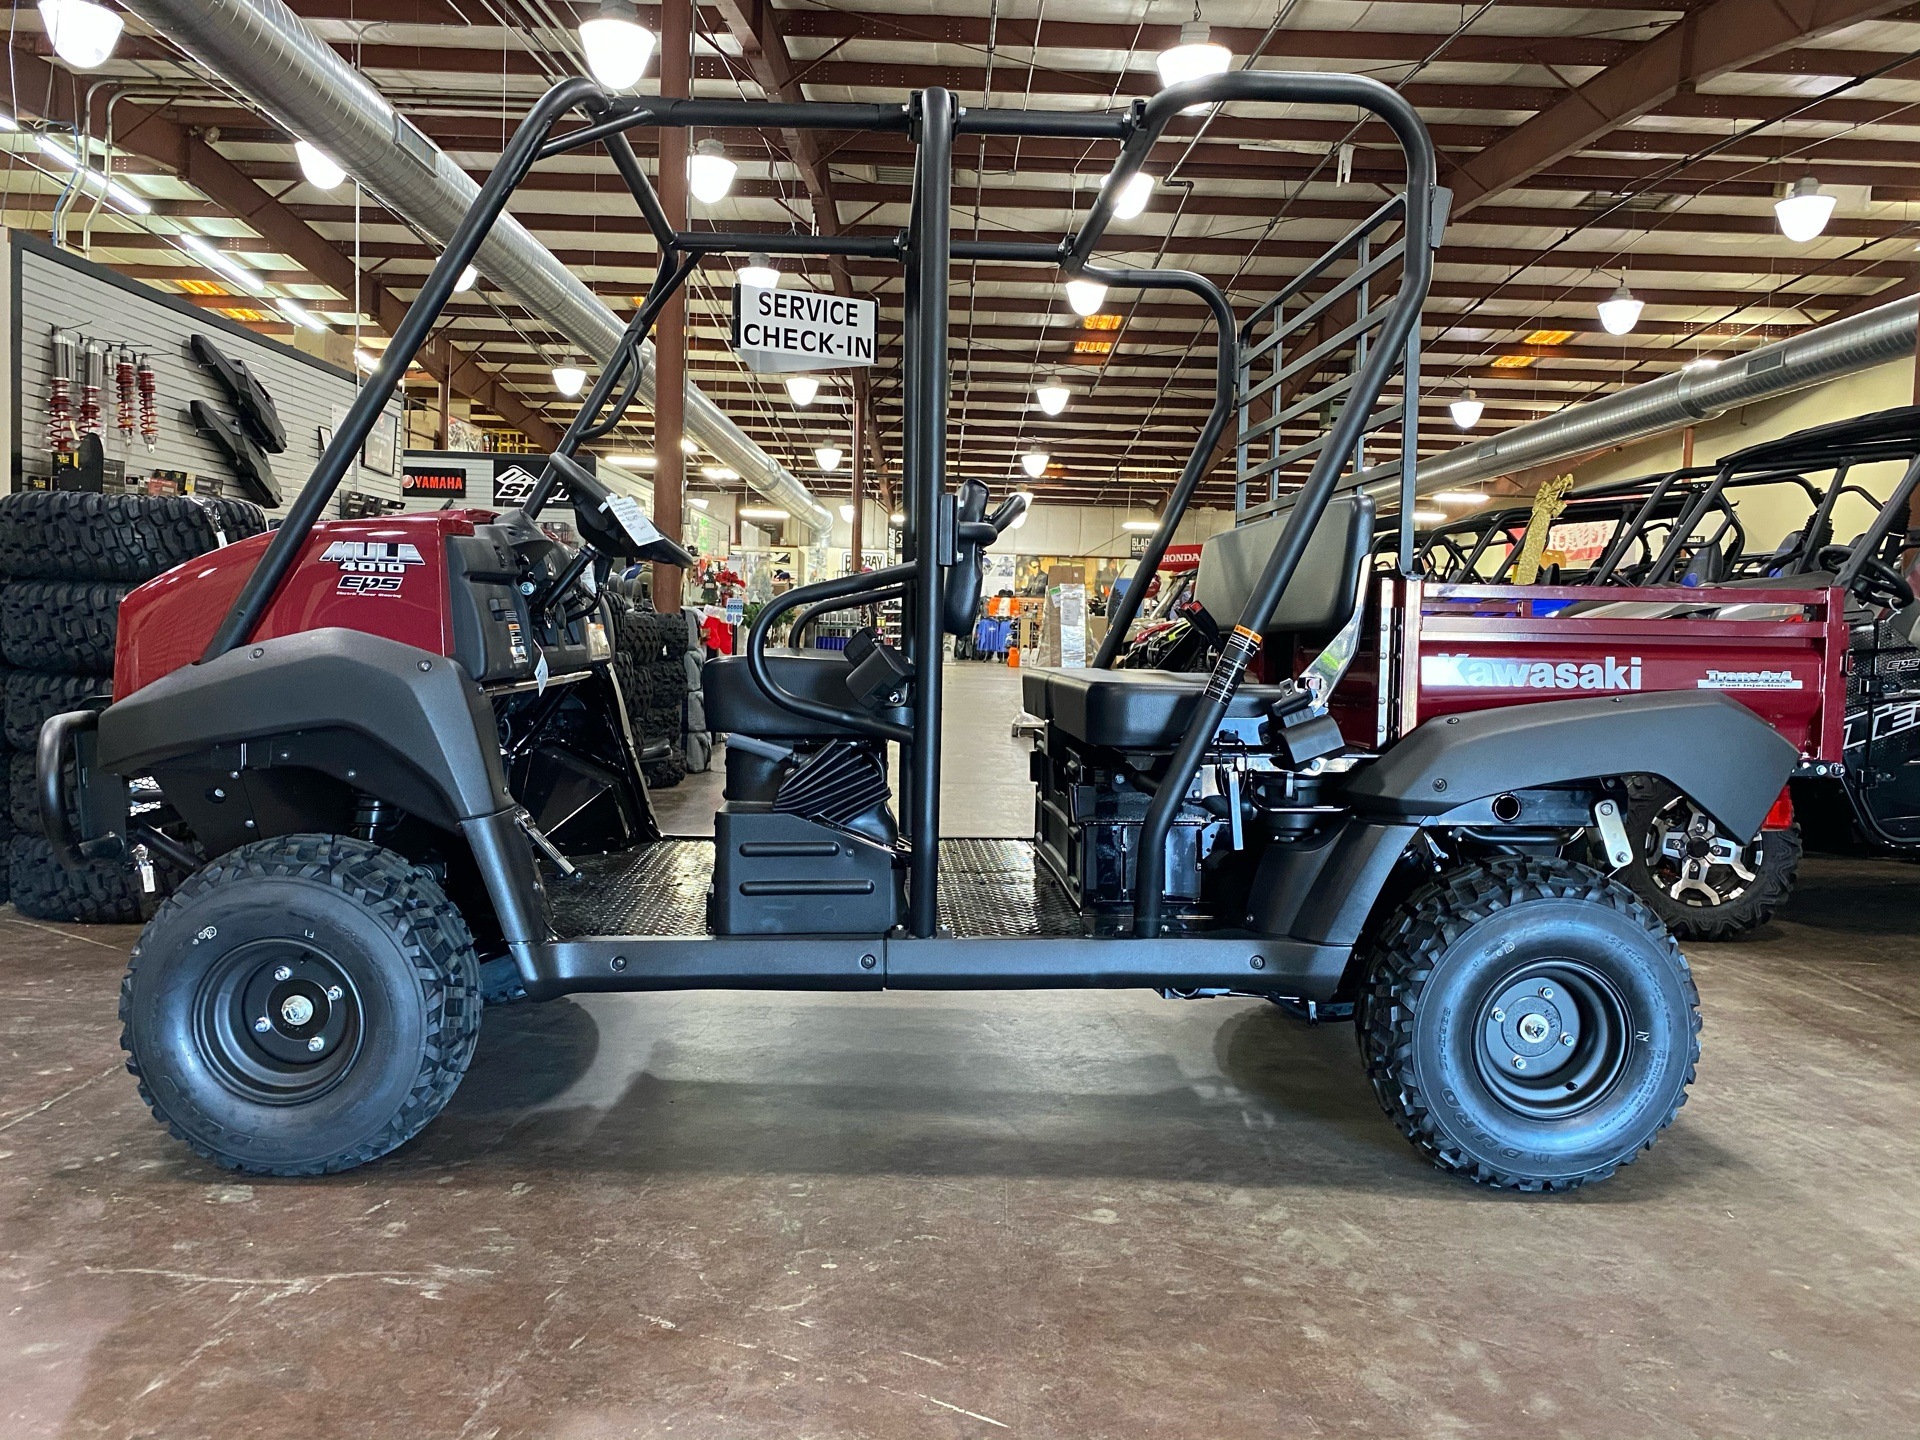 grå Forståelse hensynsfuld New 2021 Kawasaki Mule 4010 Trans4x4 Utility Vehicles in Statesville, NC |  Stock Number: 541434 - greatwesternmotorcycles.com